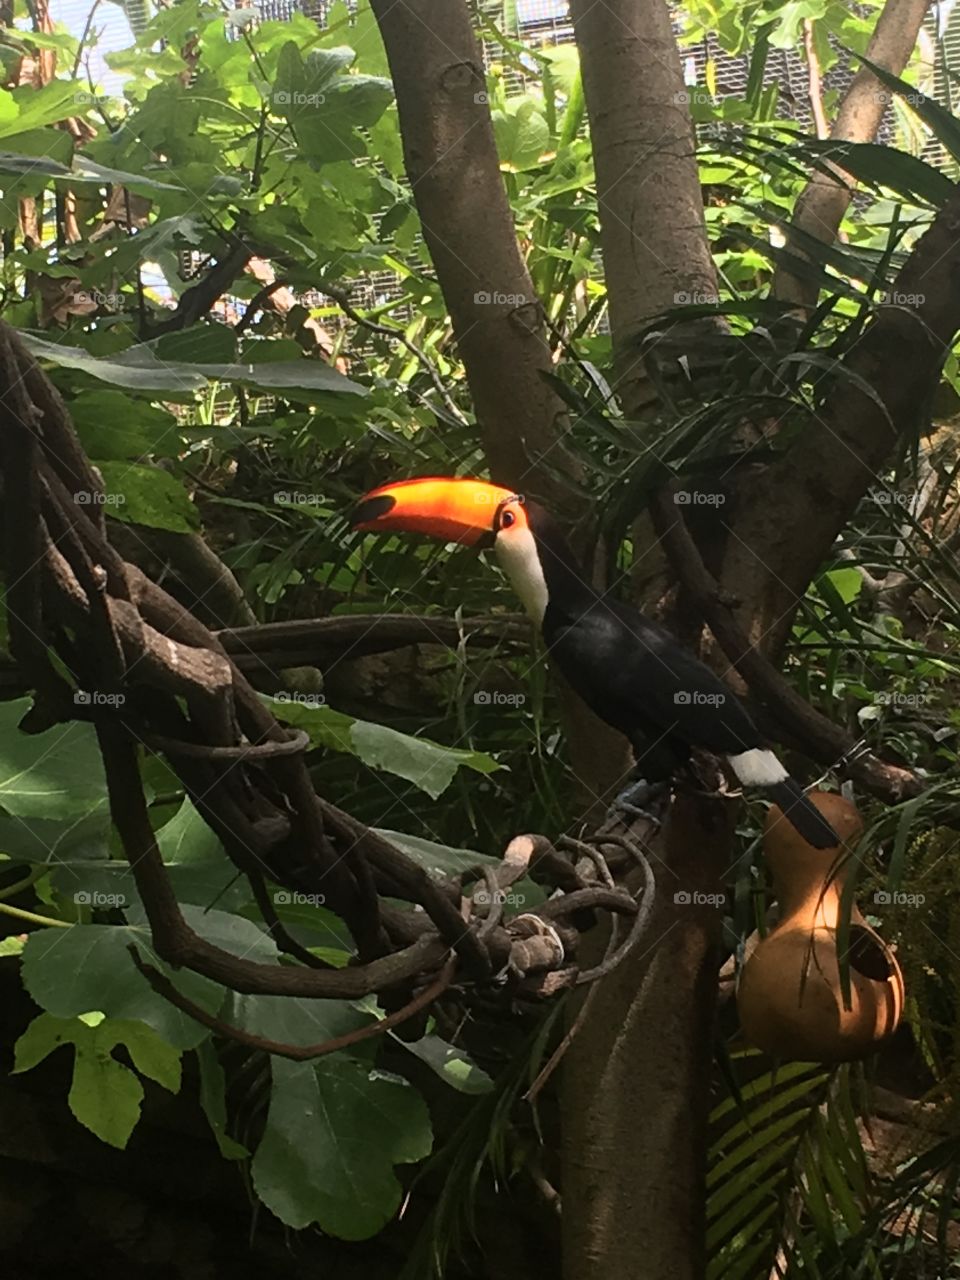 Toucan wondering where to fly to next.